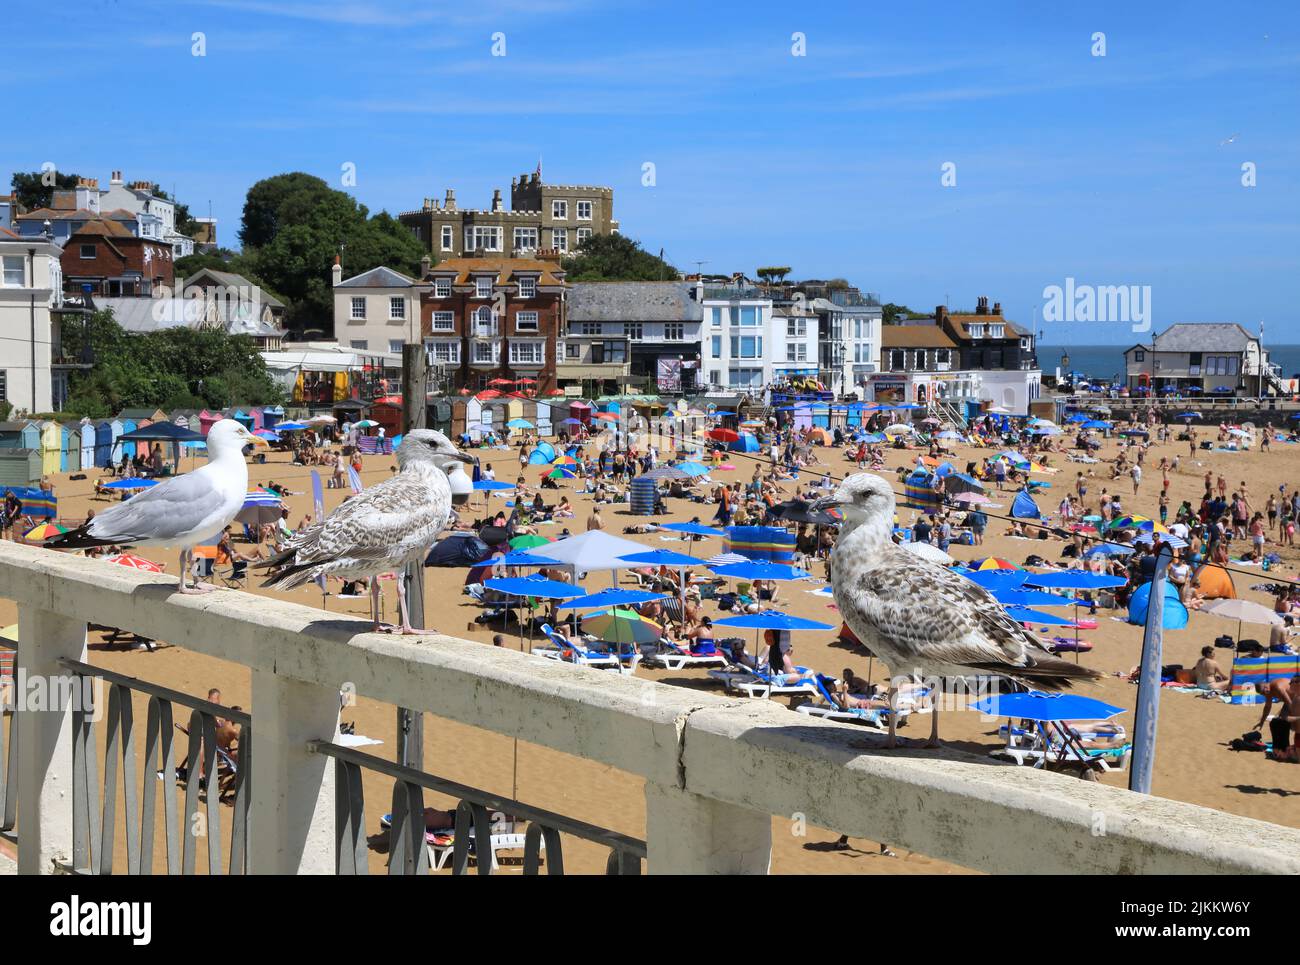 Lovely Viking Bay beach at Broadstairs on the Isle of Thanet, in Kent, UK Stock Photo